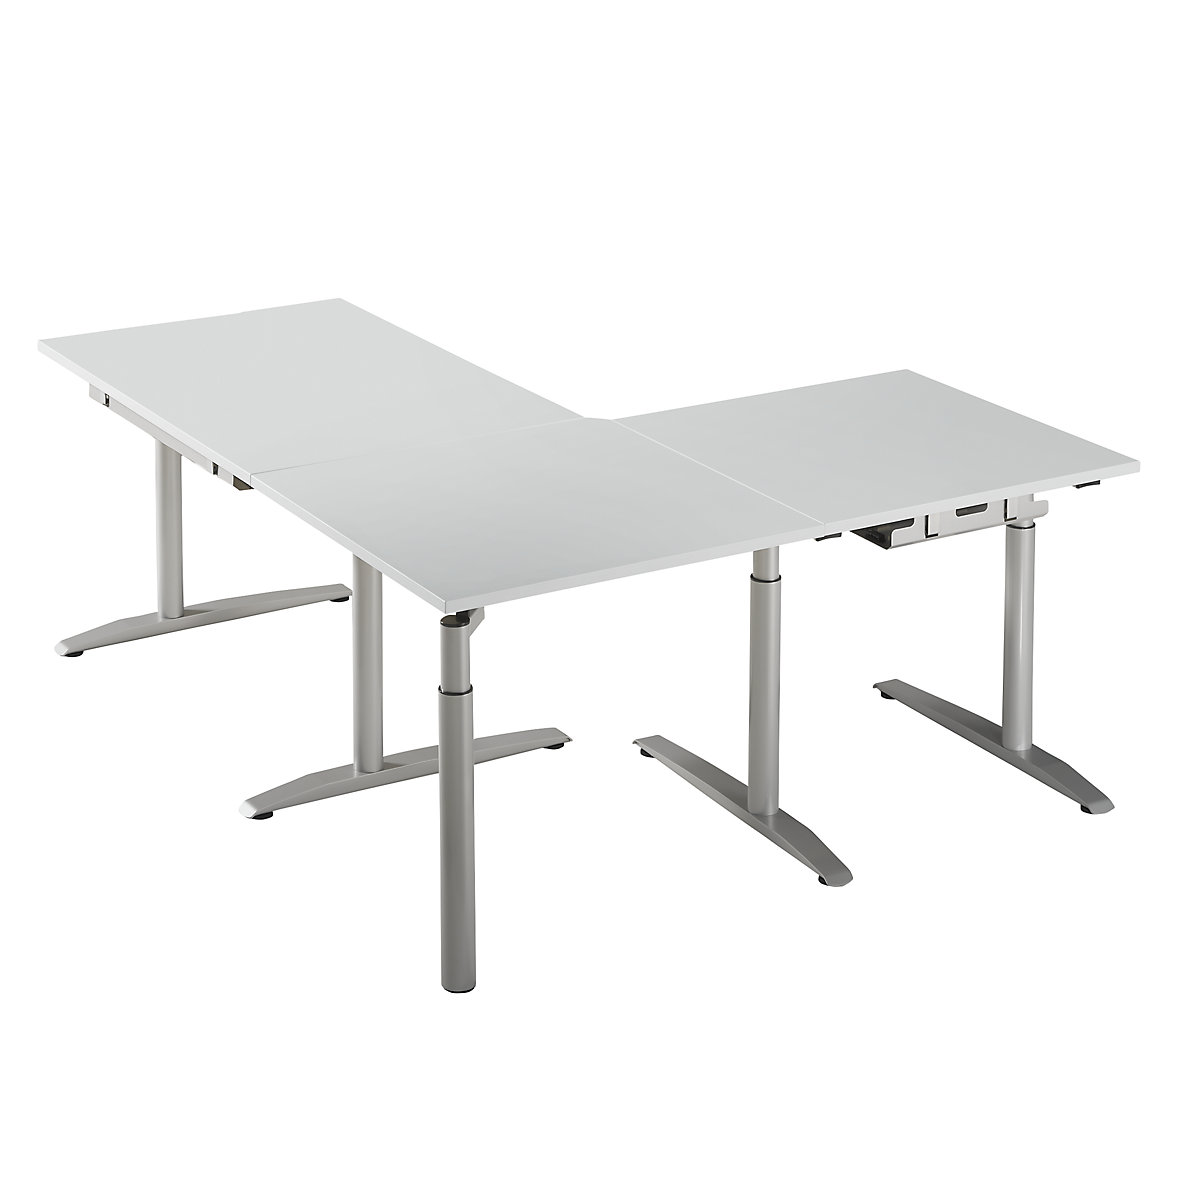 Linking top, height adjustable from 680 – 820 mm HANNA